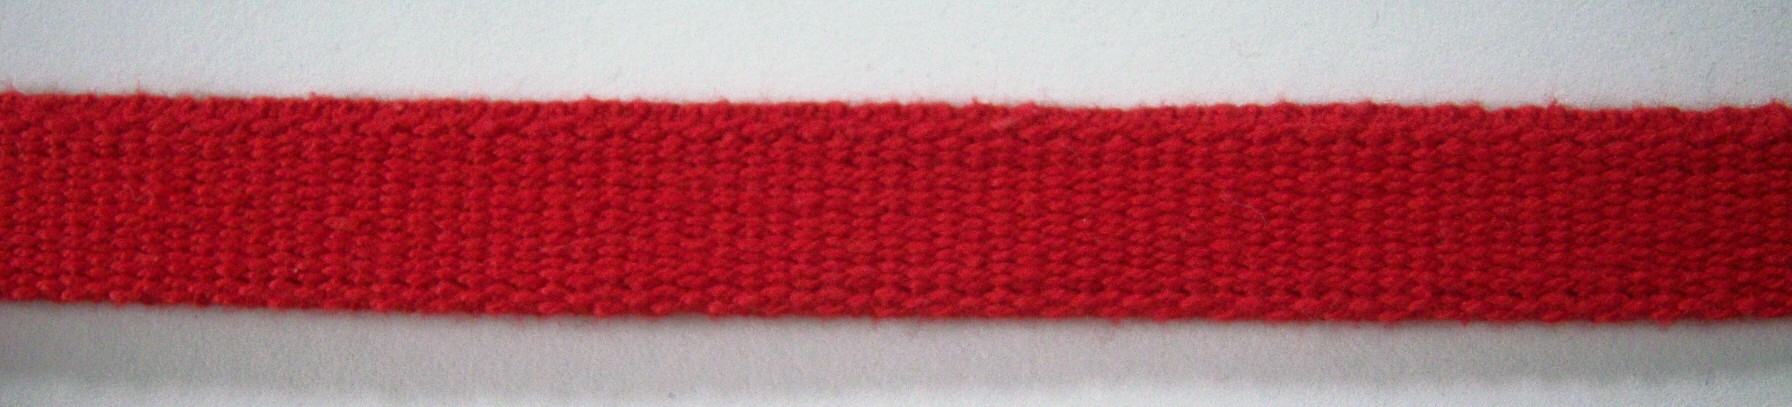 Red 5/8" Cotton Webbing